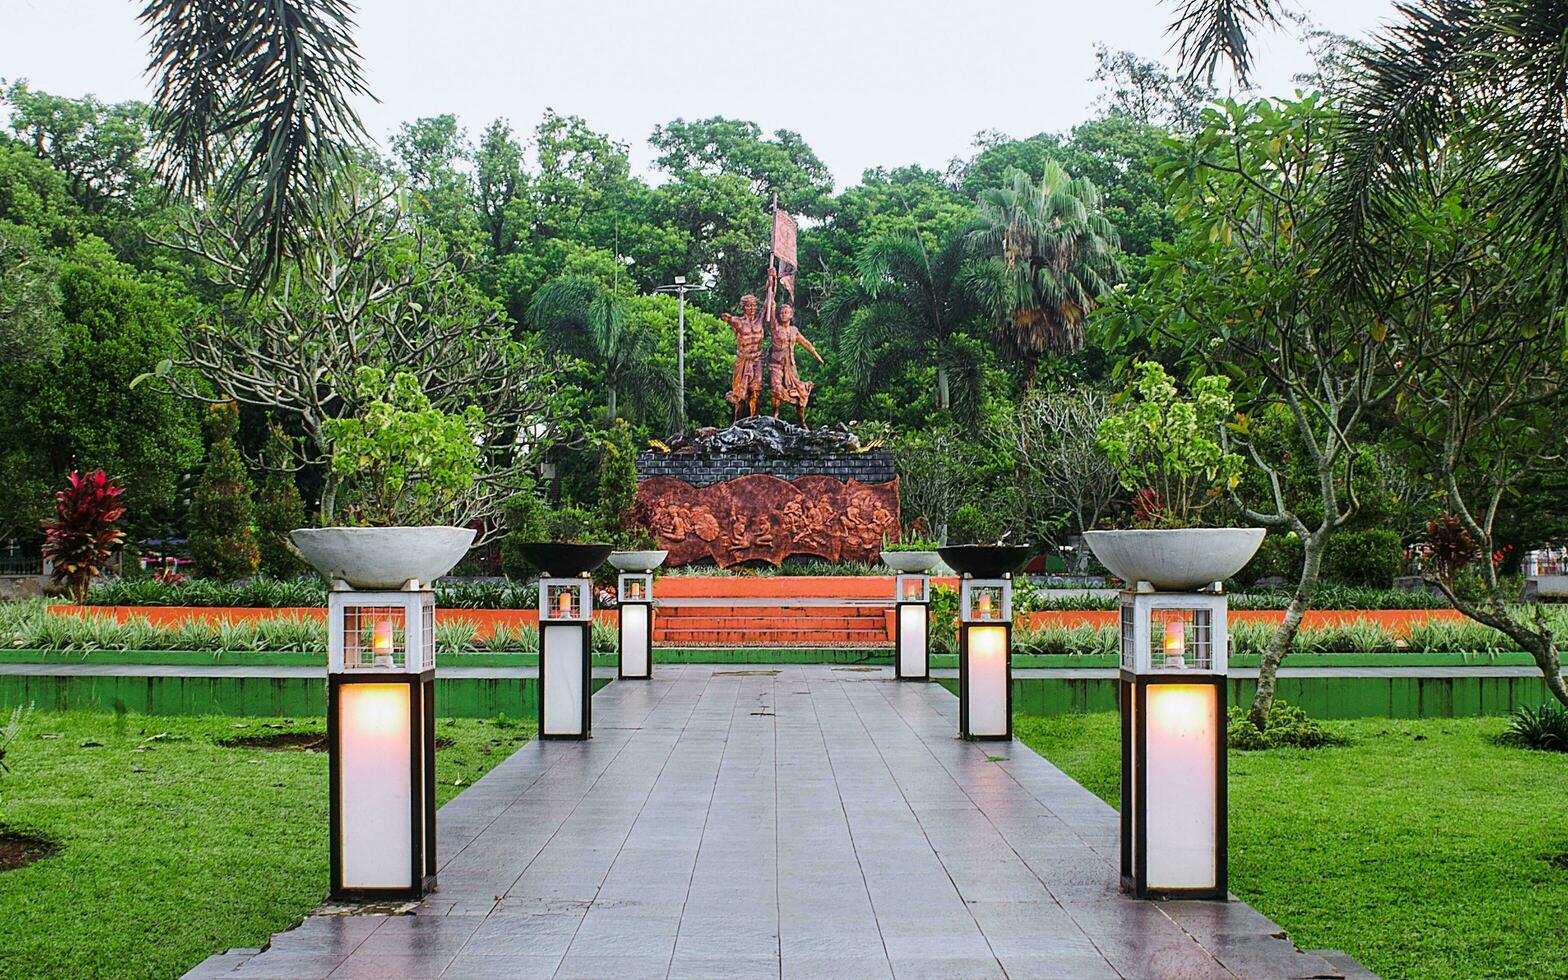 Tasikmalaya, Indonesia, November 20, 2022, Mak Eroh and Abdul Rozak Monument in Tasikmalaya City Park, the monument was erected as a form of appreciation and their struggle as farmers photo